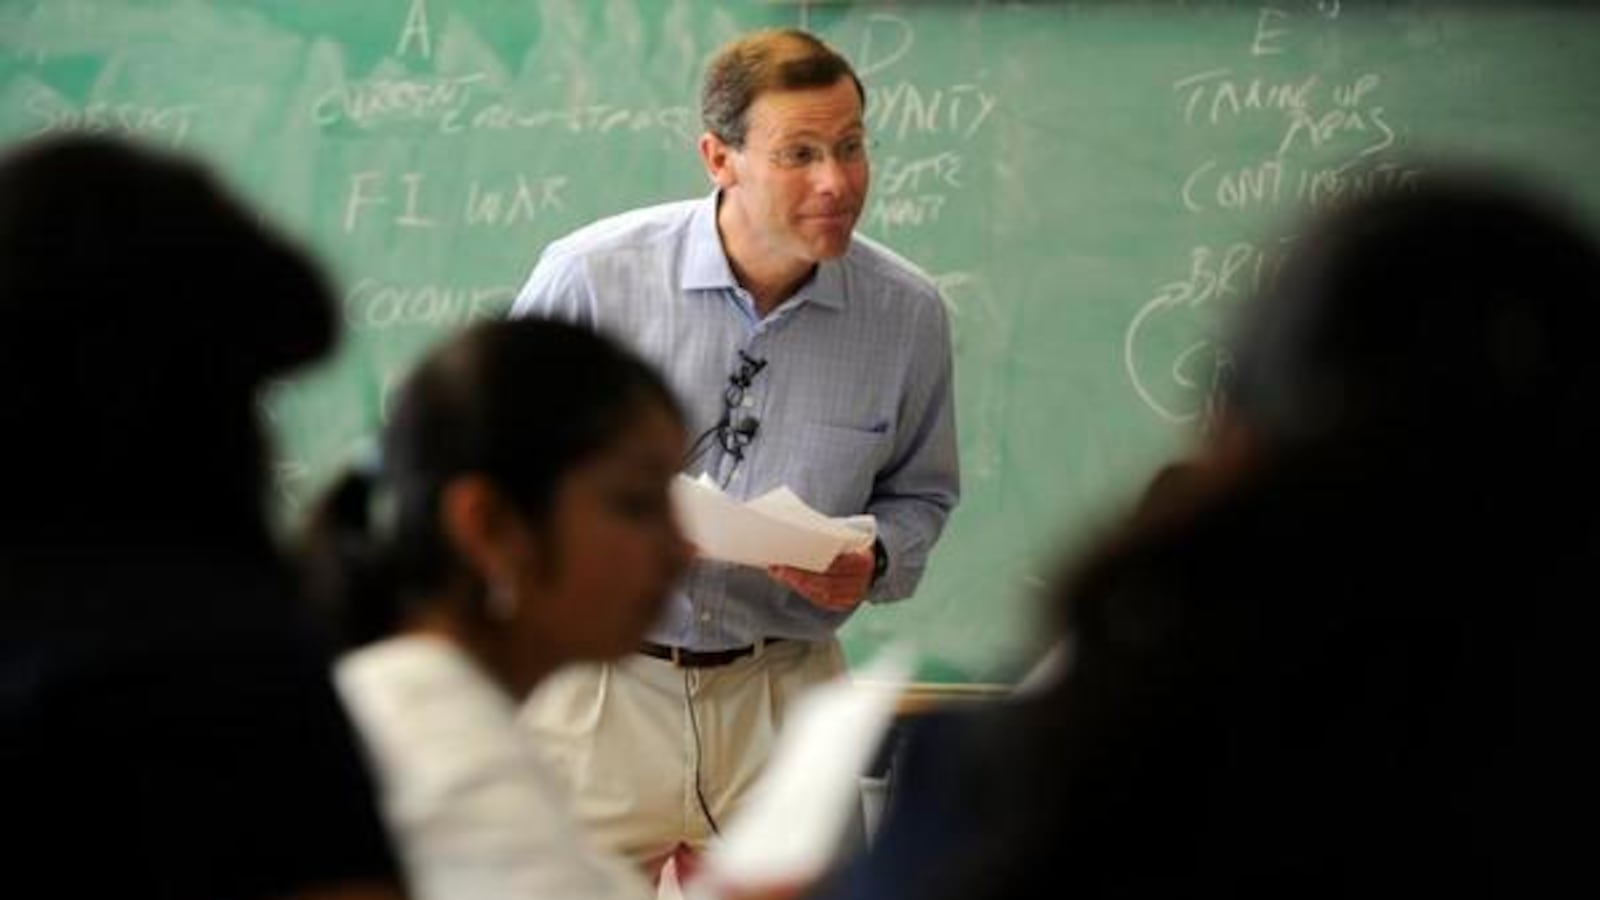 Denver Public Schools Superintendent Tom Boasberg guest teaches an Advanced Placement history class at Lincoln High in 2009.